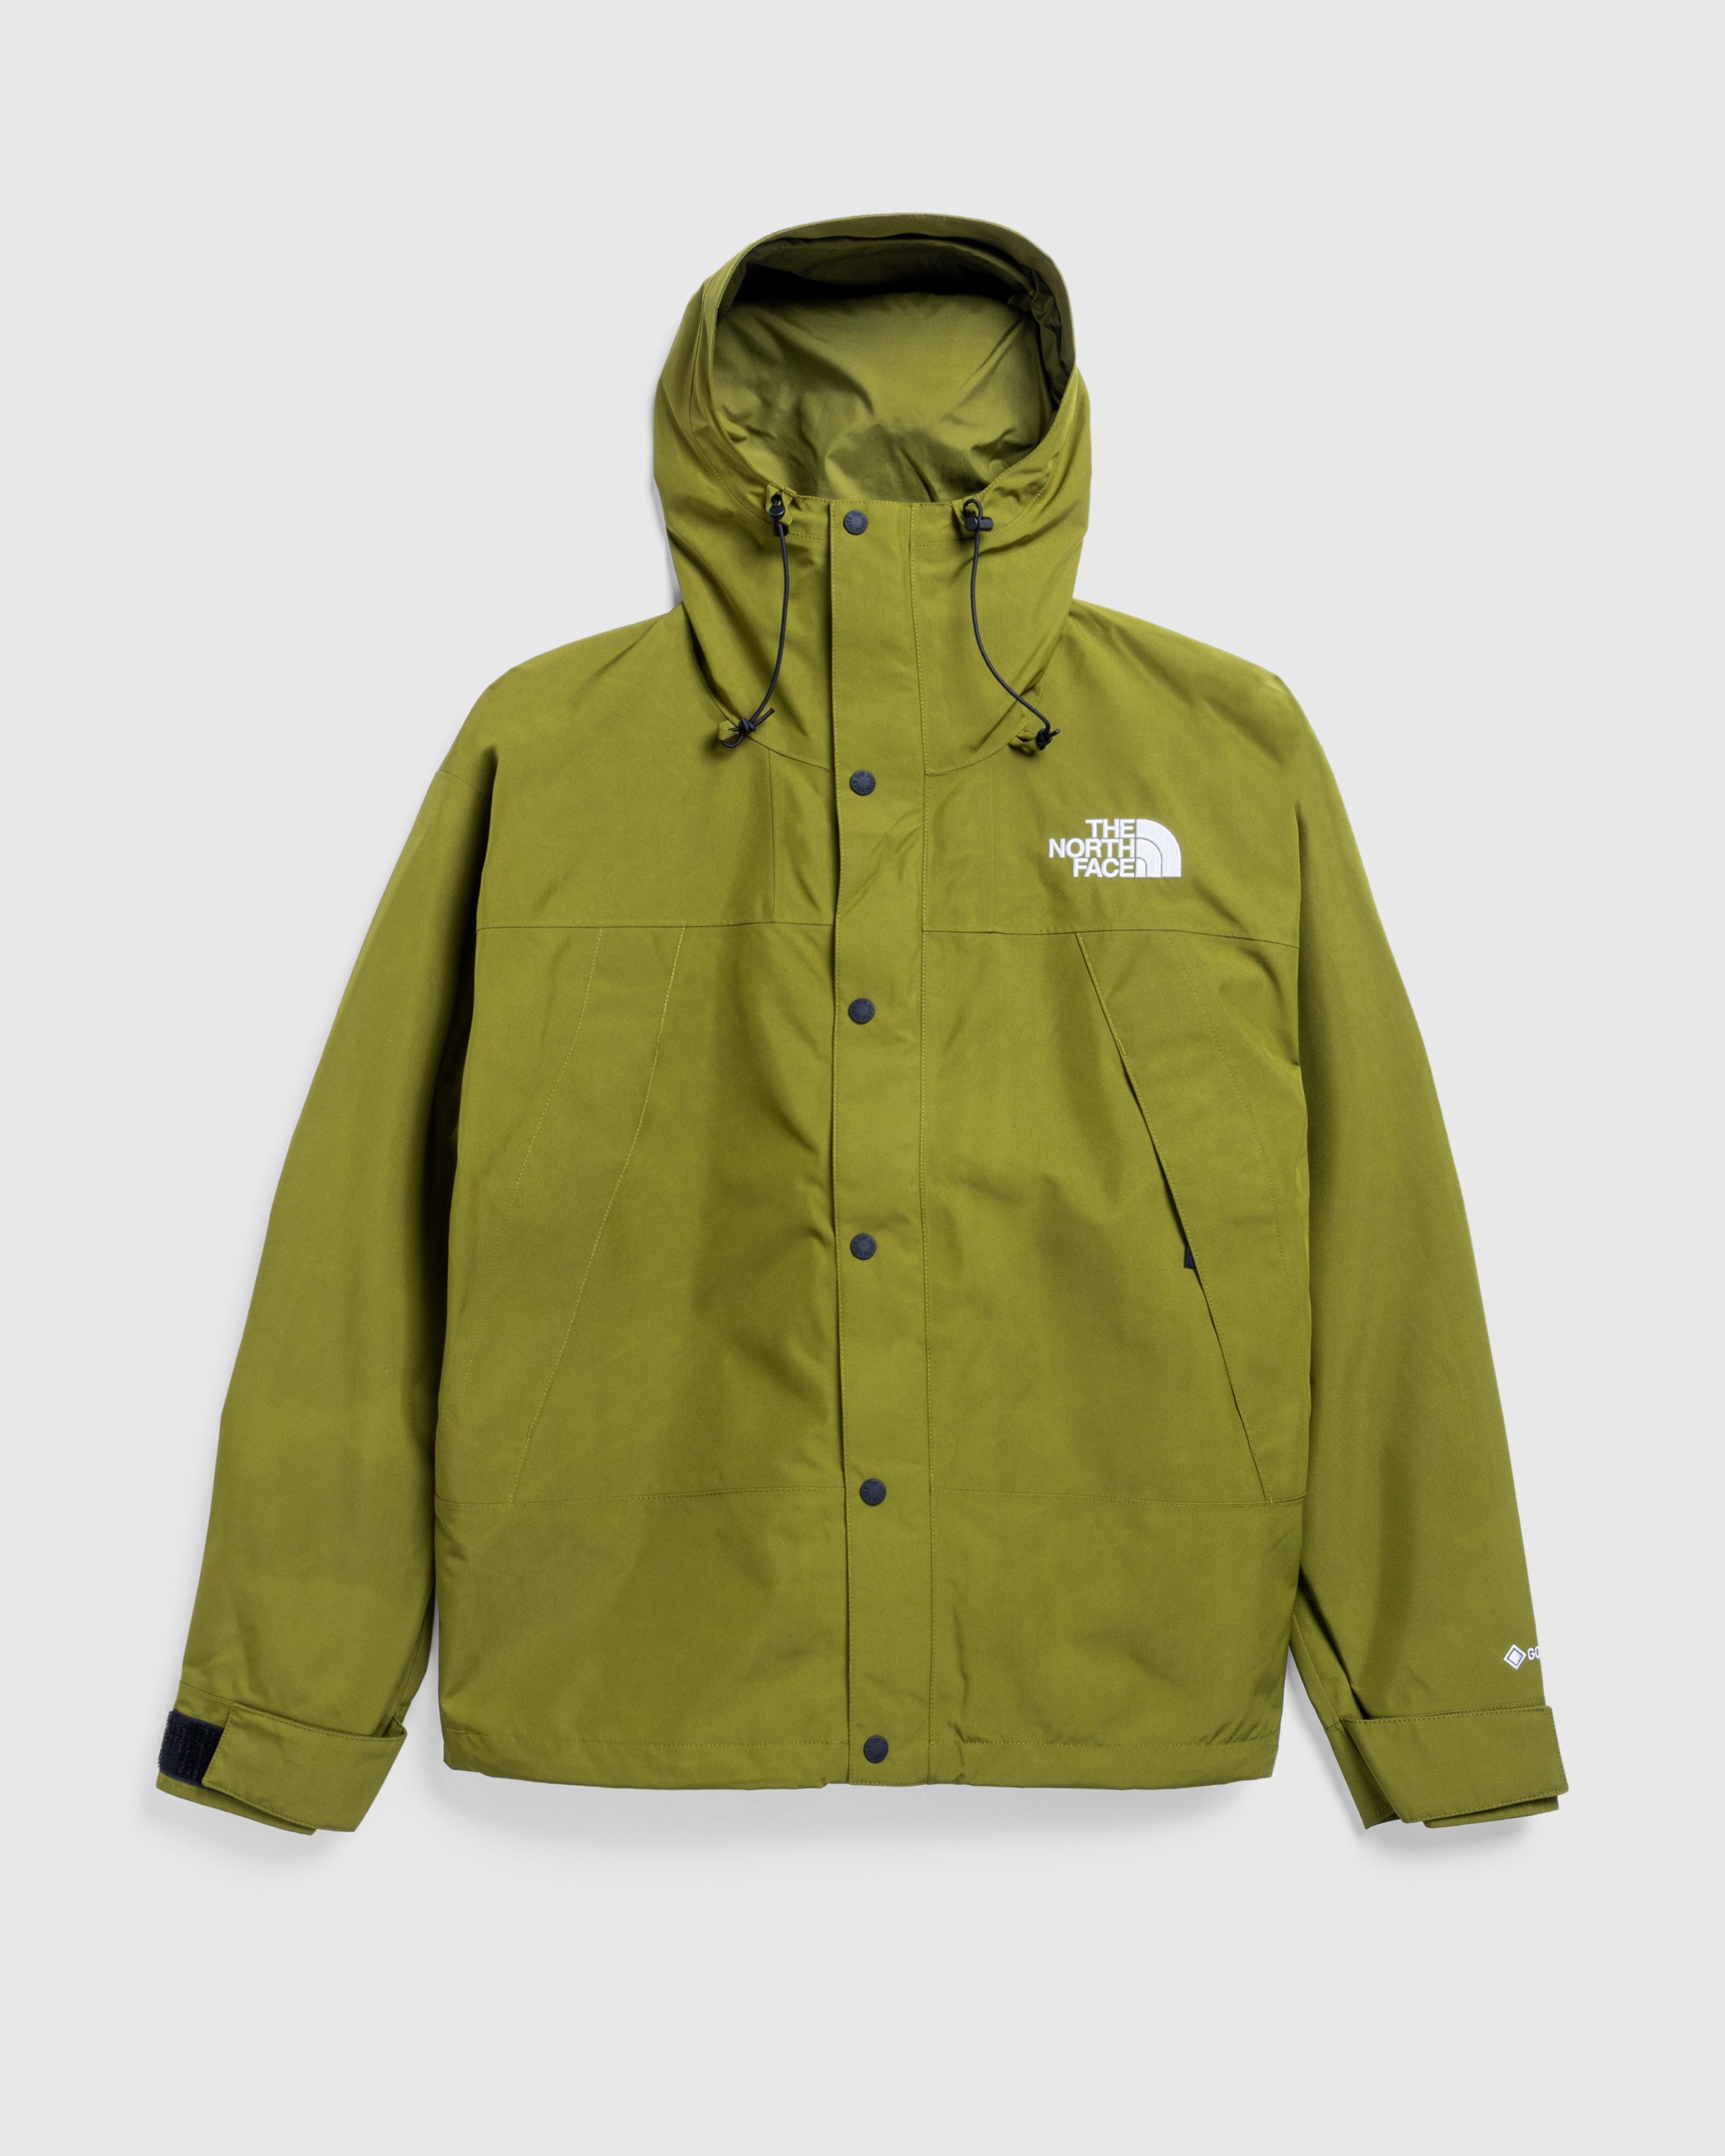 The North Face, North Face Clothing